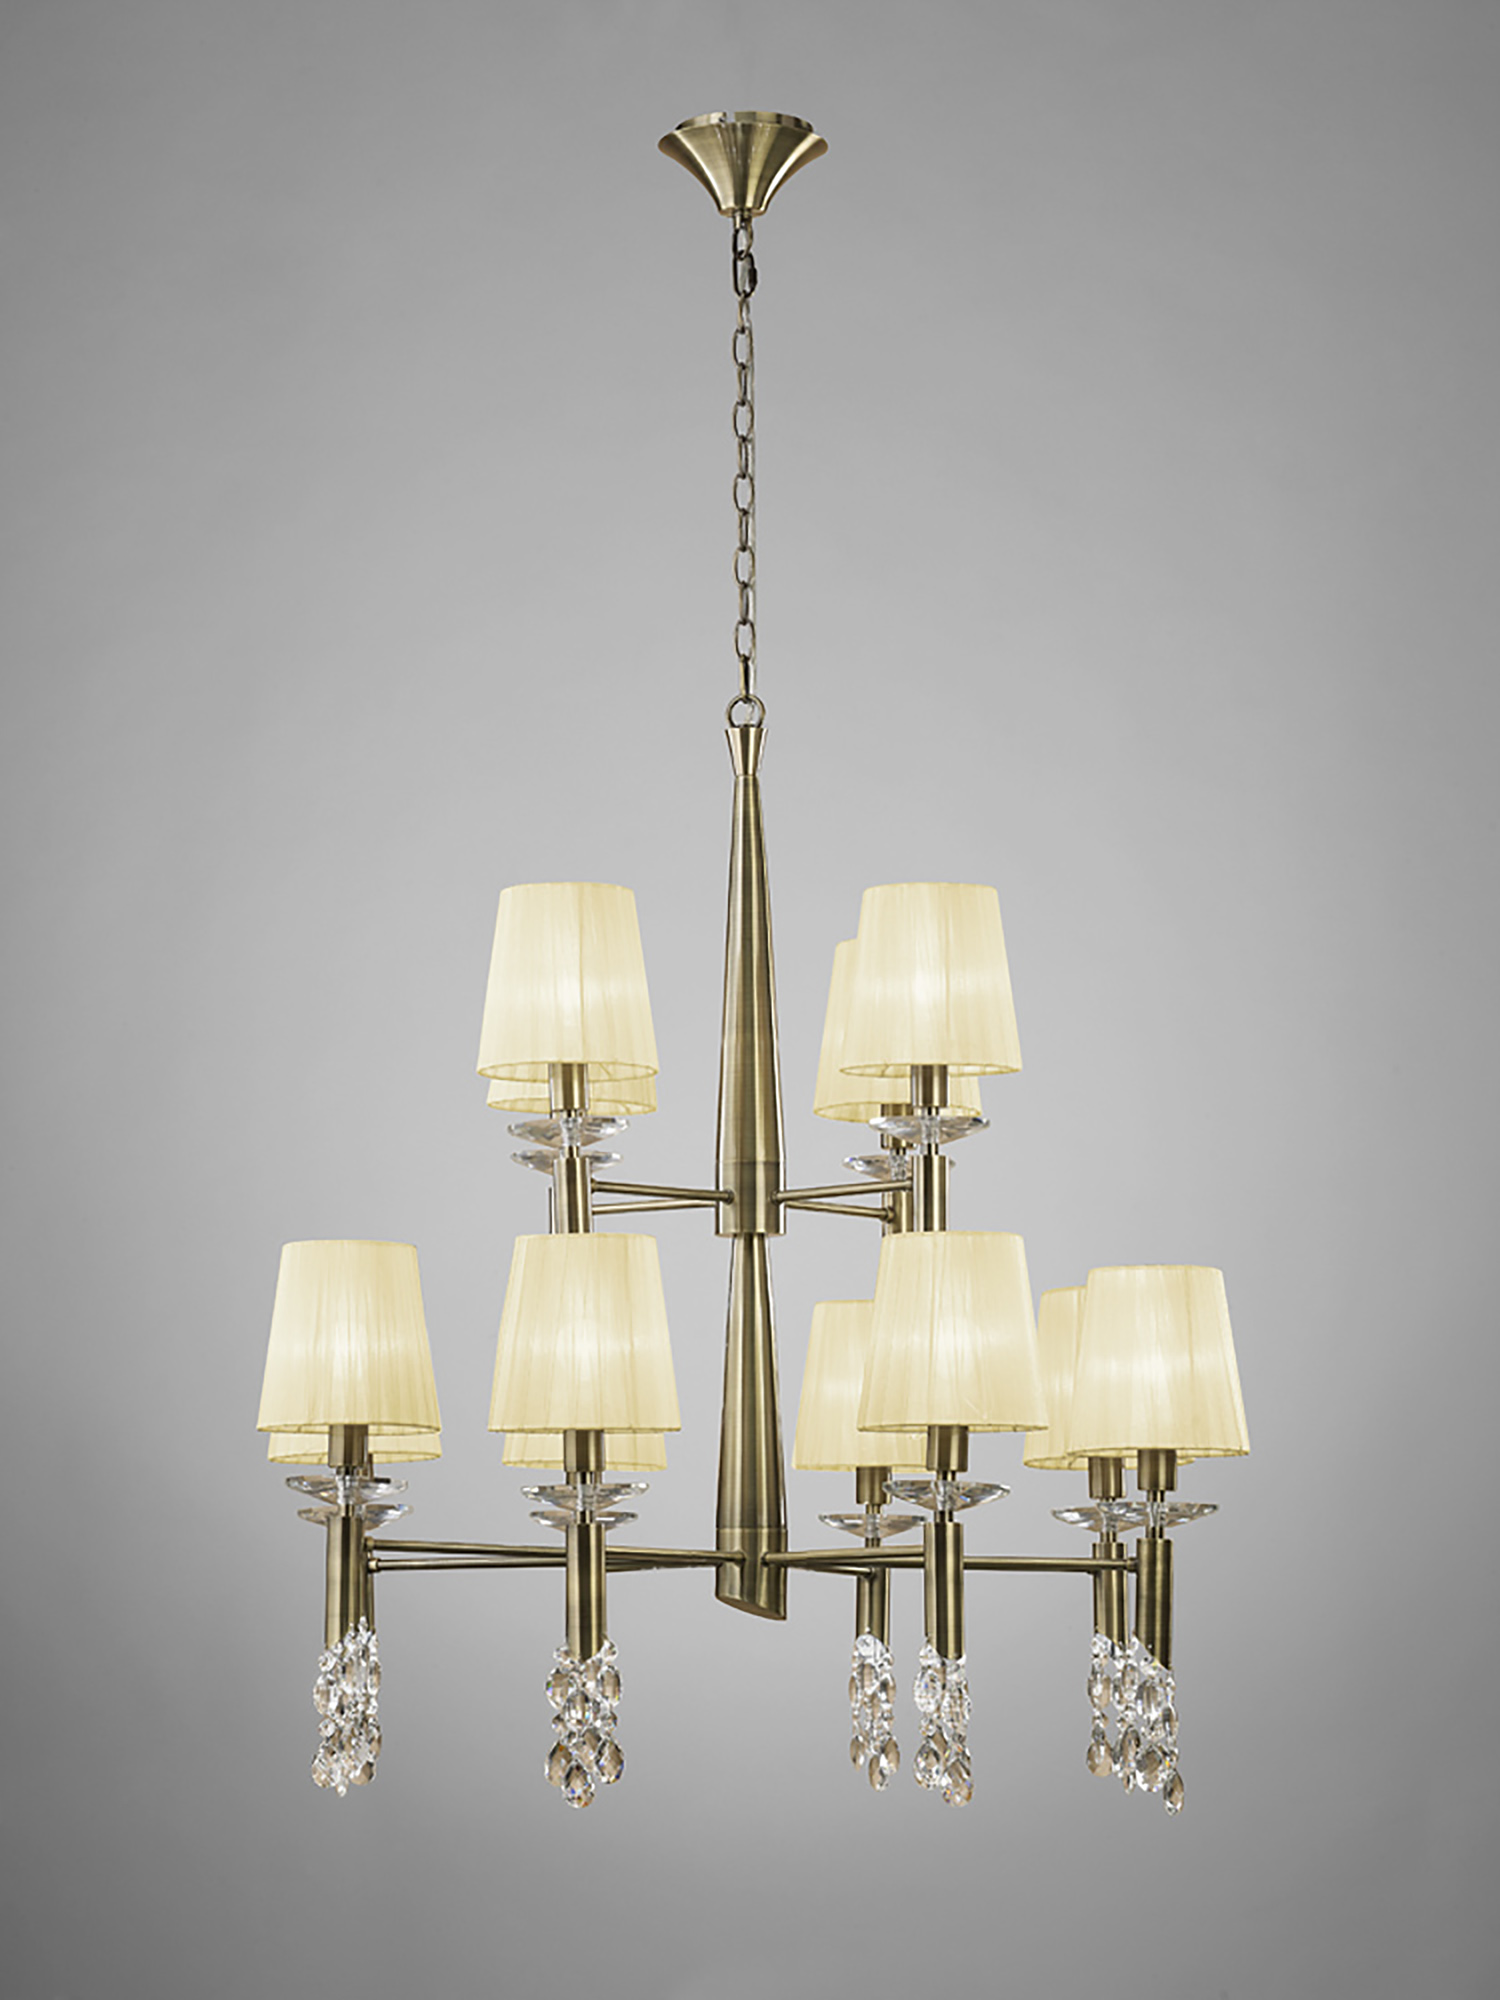 Tiffany Antique Brass-Cream Crystal Ceiling Lights Mantra Tiered Crystal Fittings